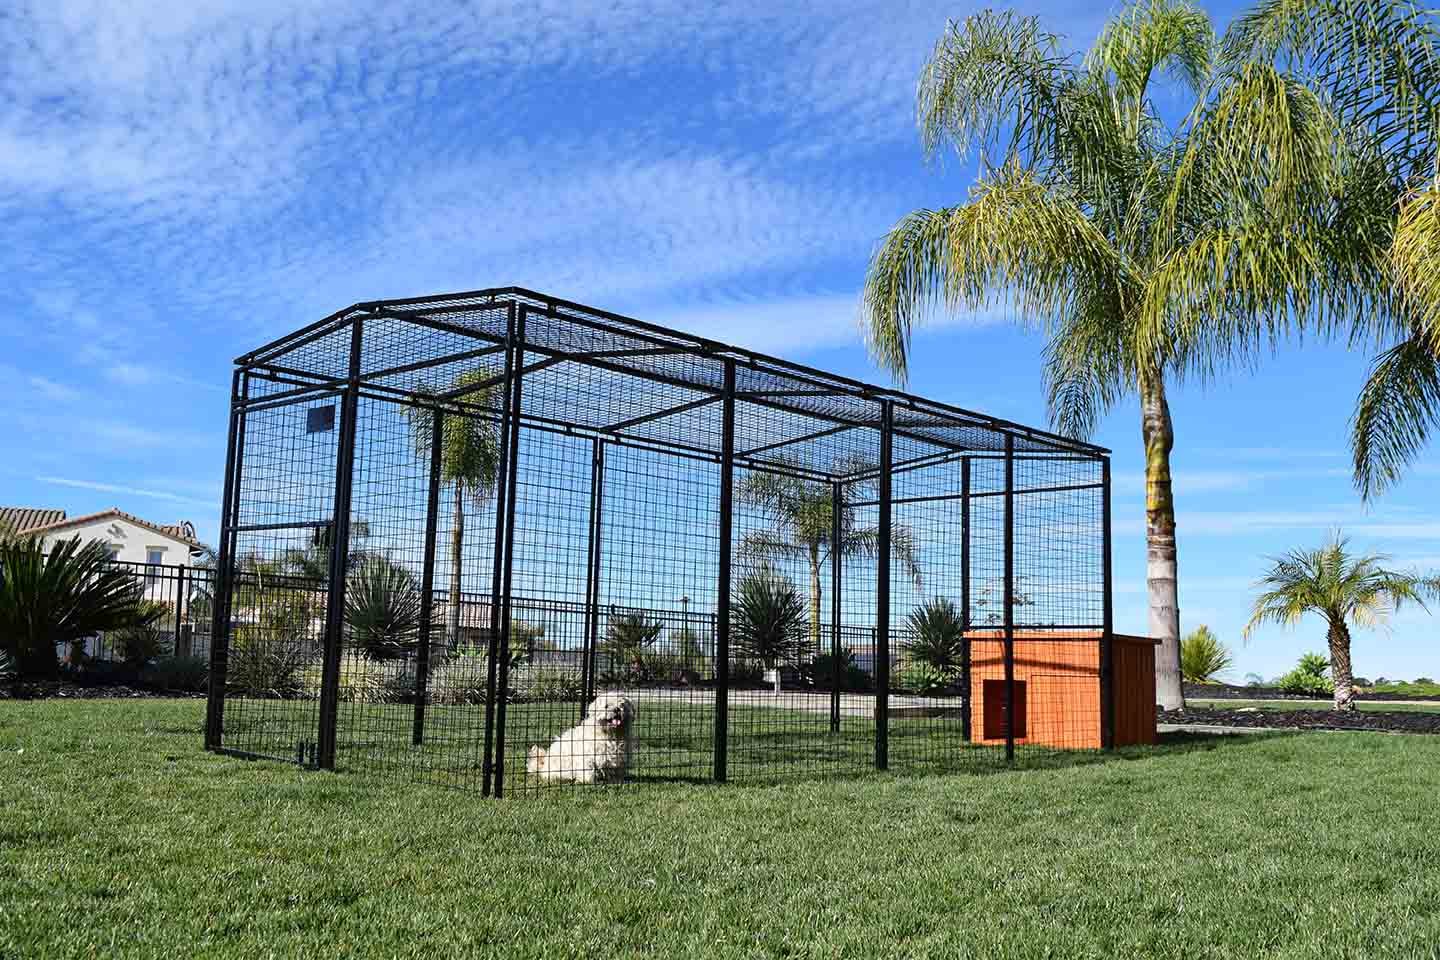 a small white dog inside a pen with a dog house